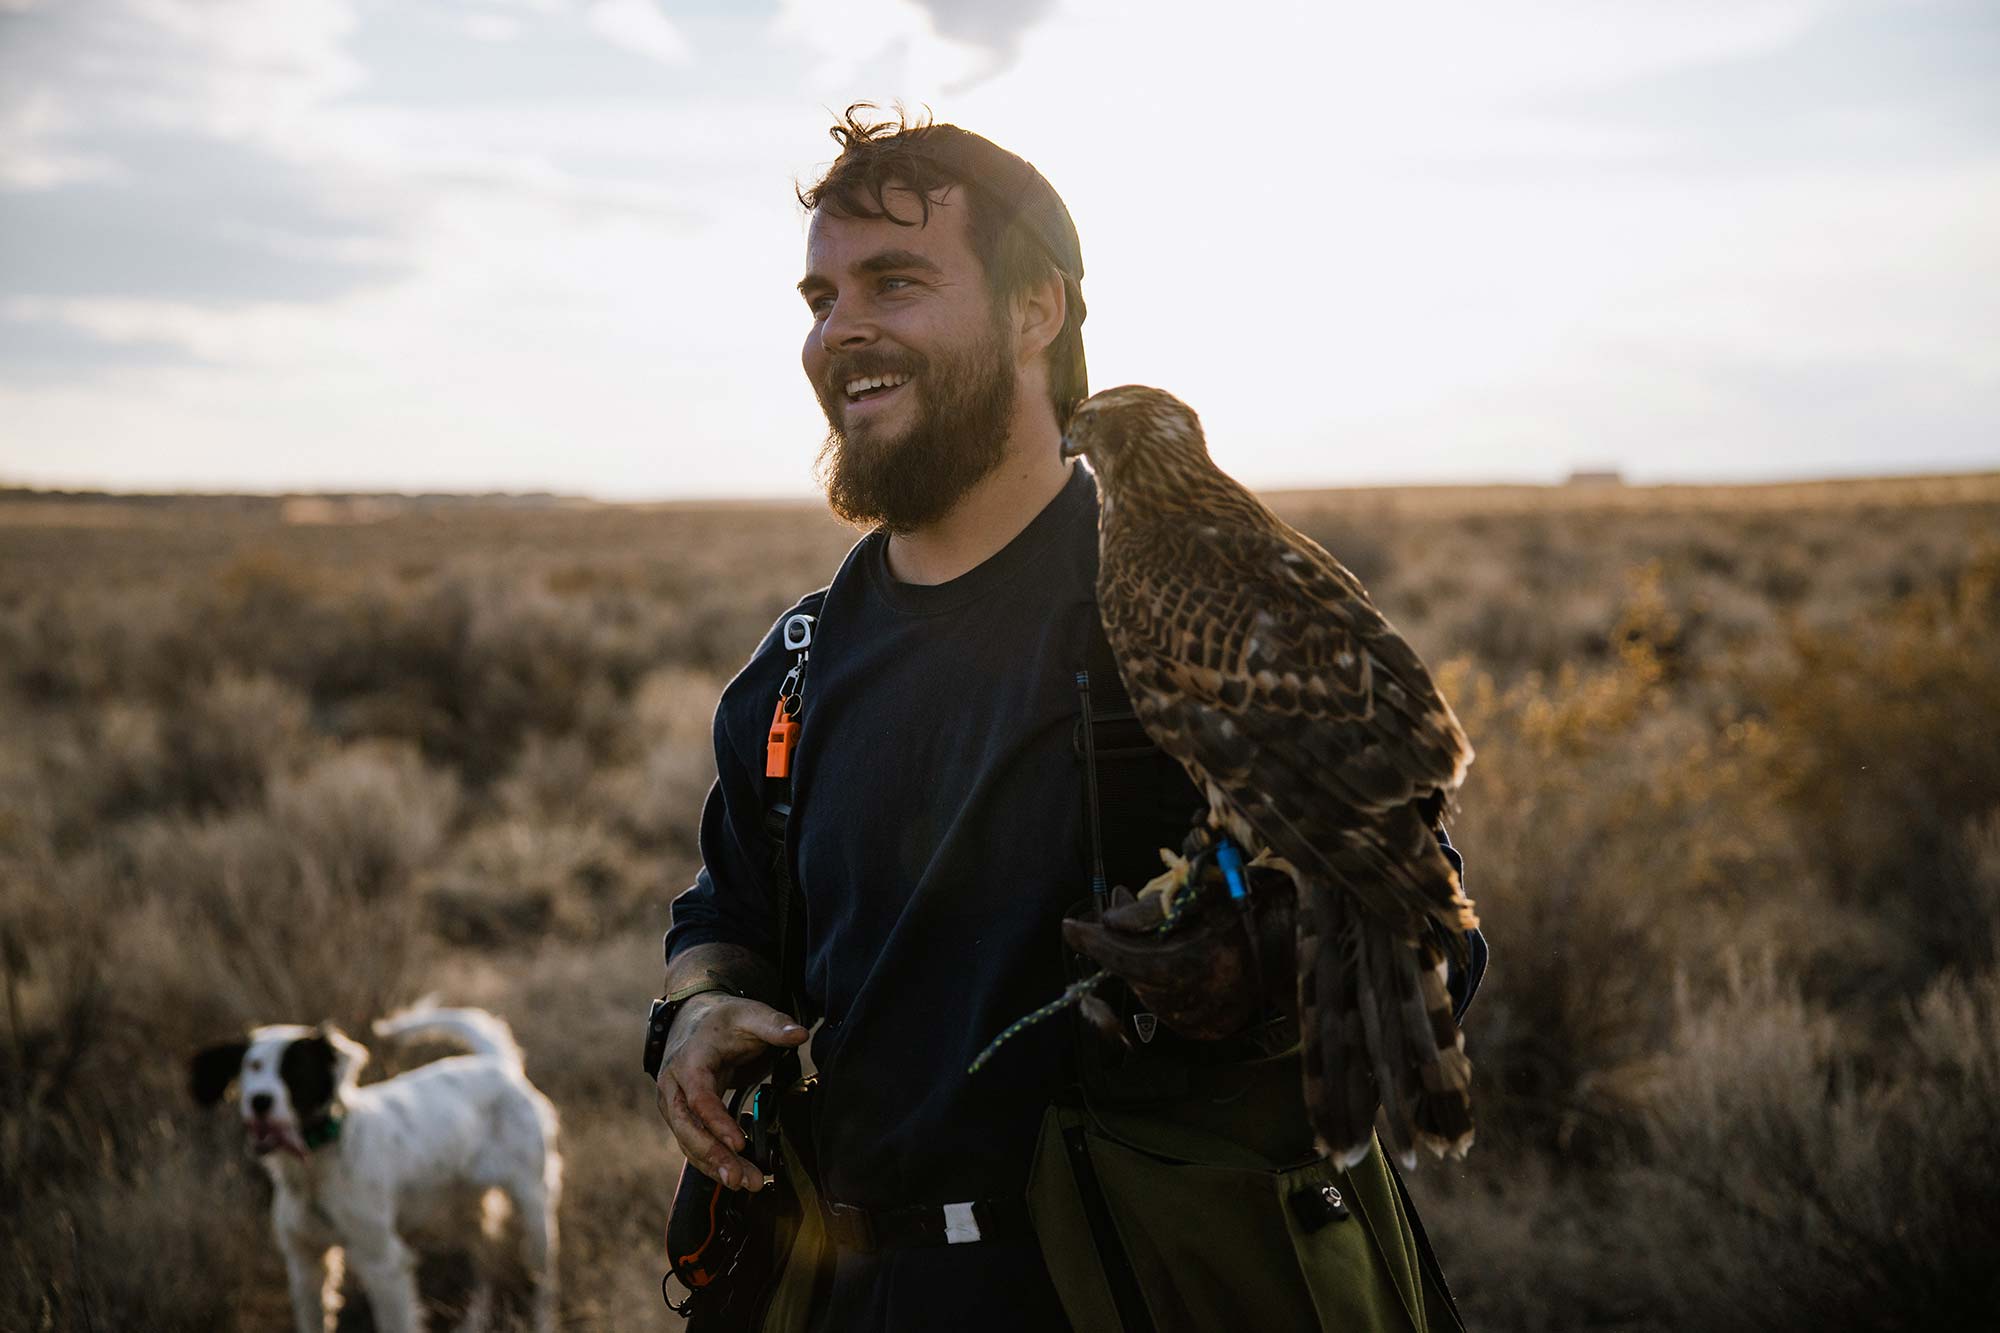 Tyler Sladen found falconry after growing up in the hardcore/punk rock music scene.